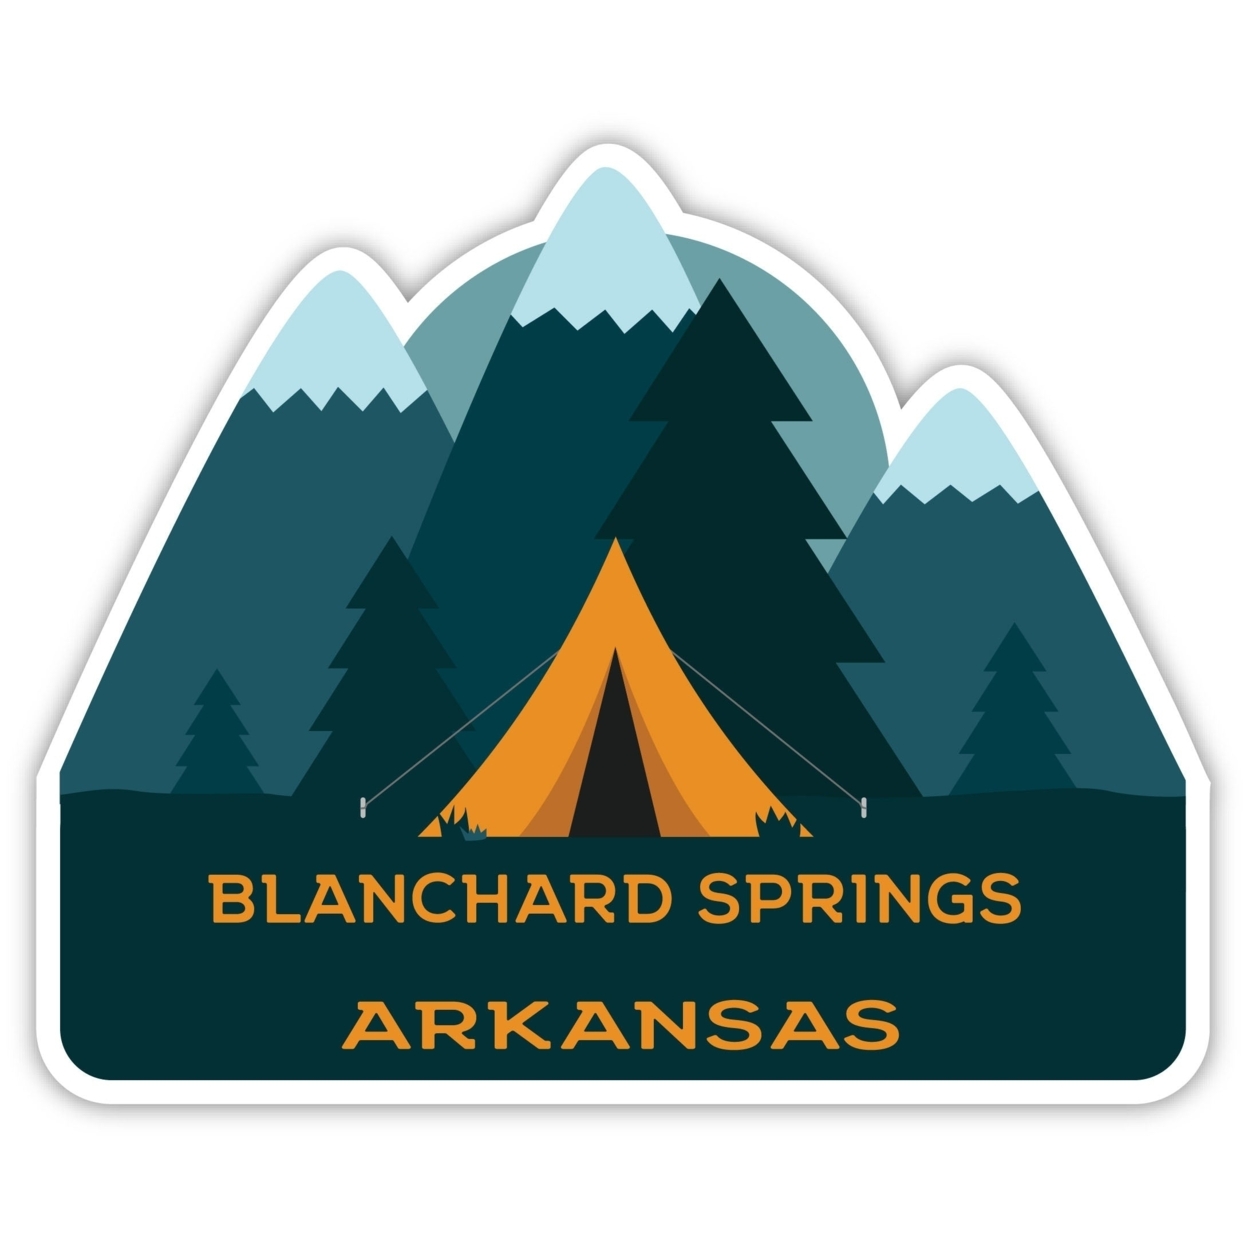 Blanchard Springs Arkansas Souvenir Decorative Stickers (Choose Theme And Size) - 4-Pack, 6-Inch, Tent